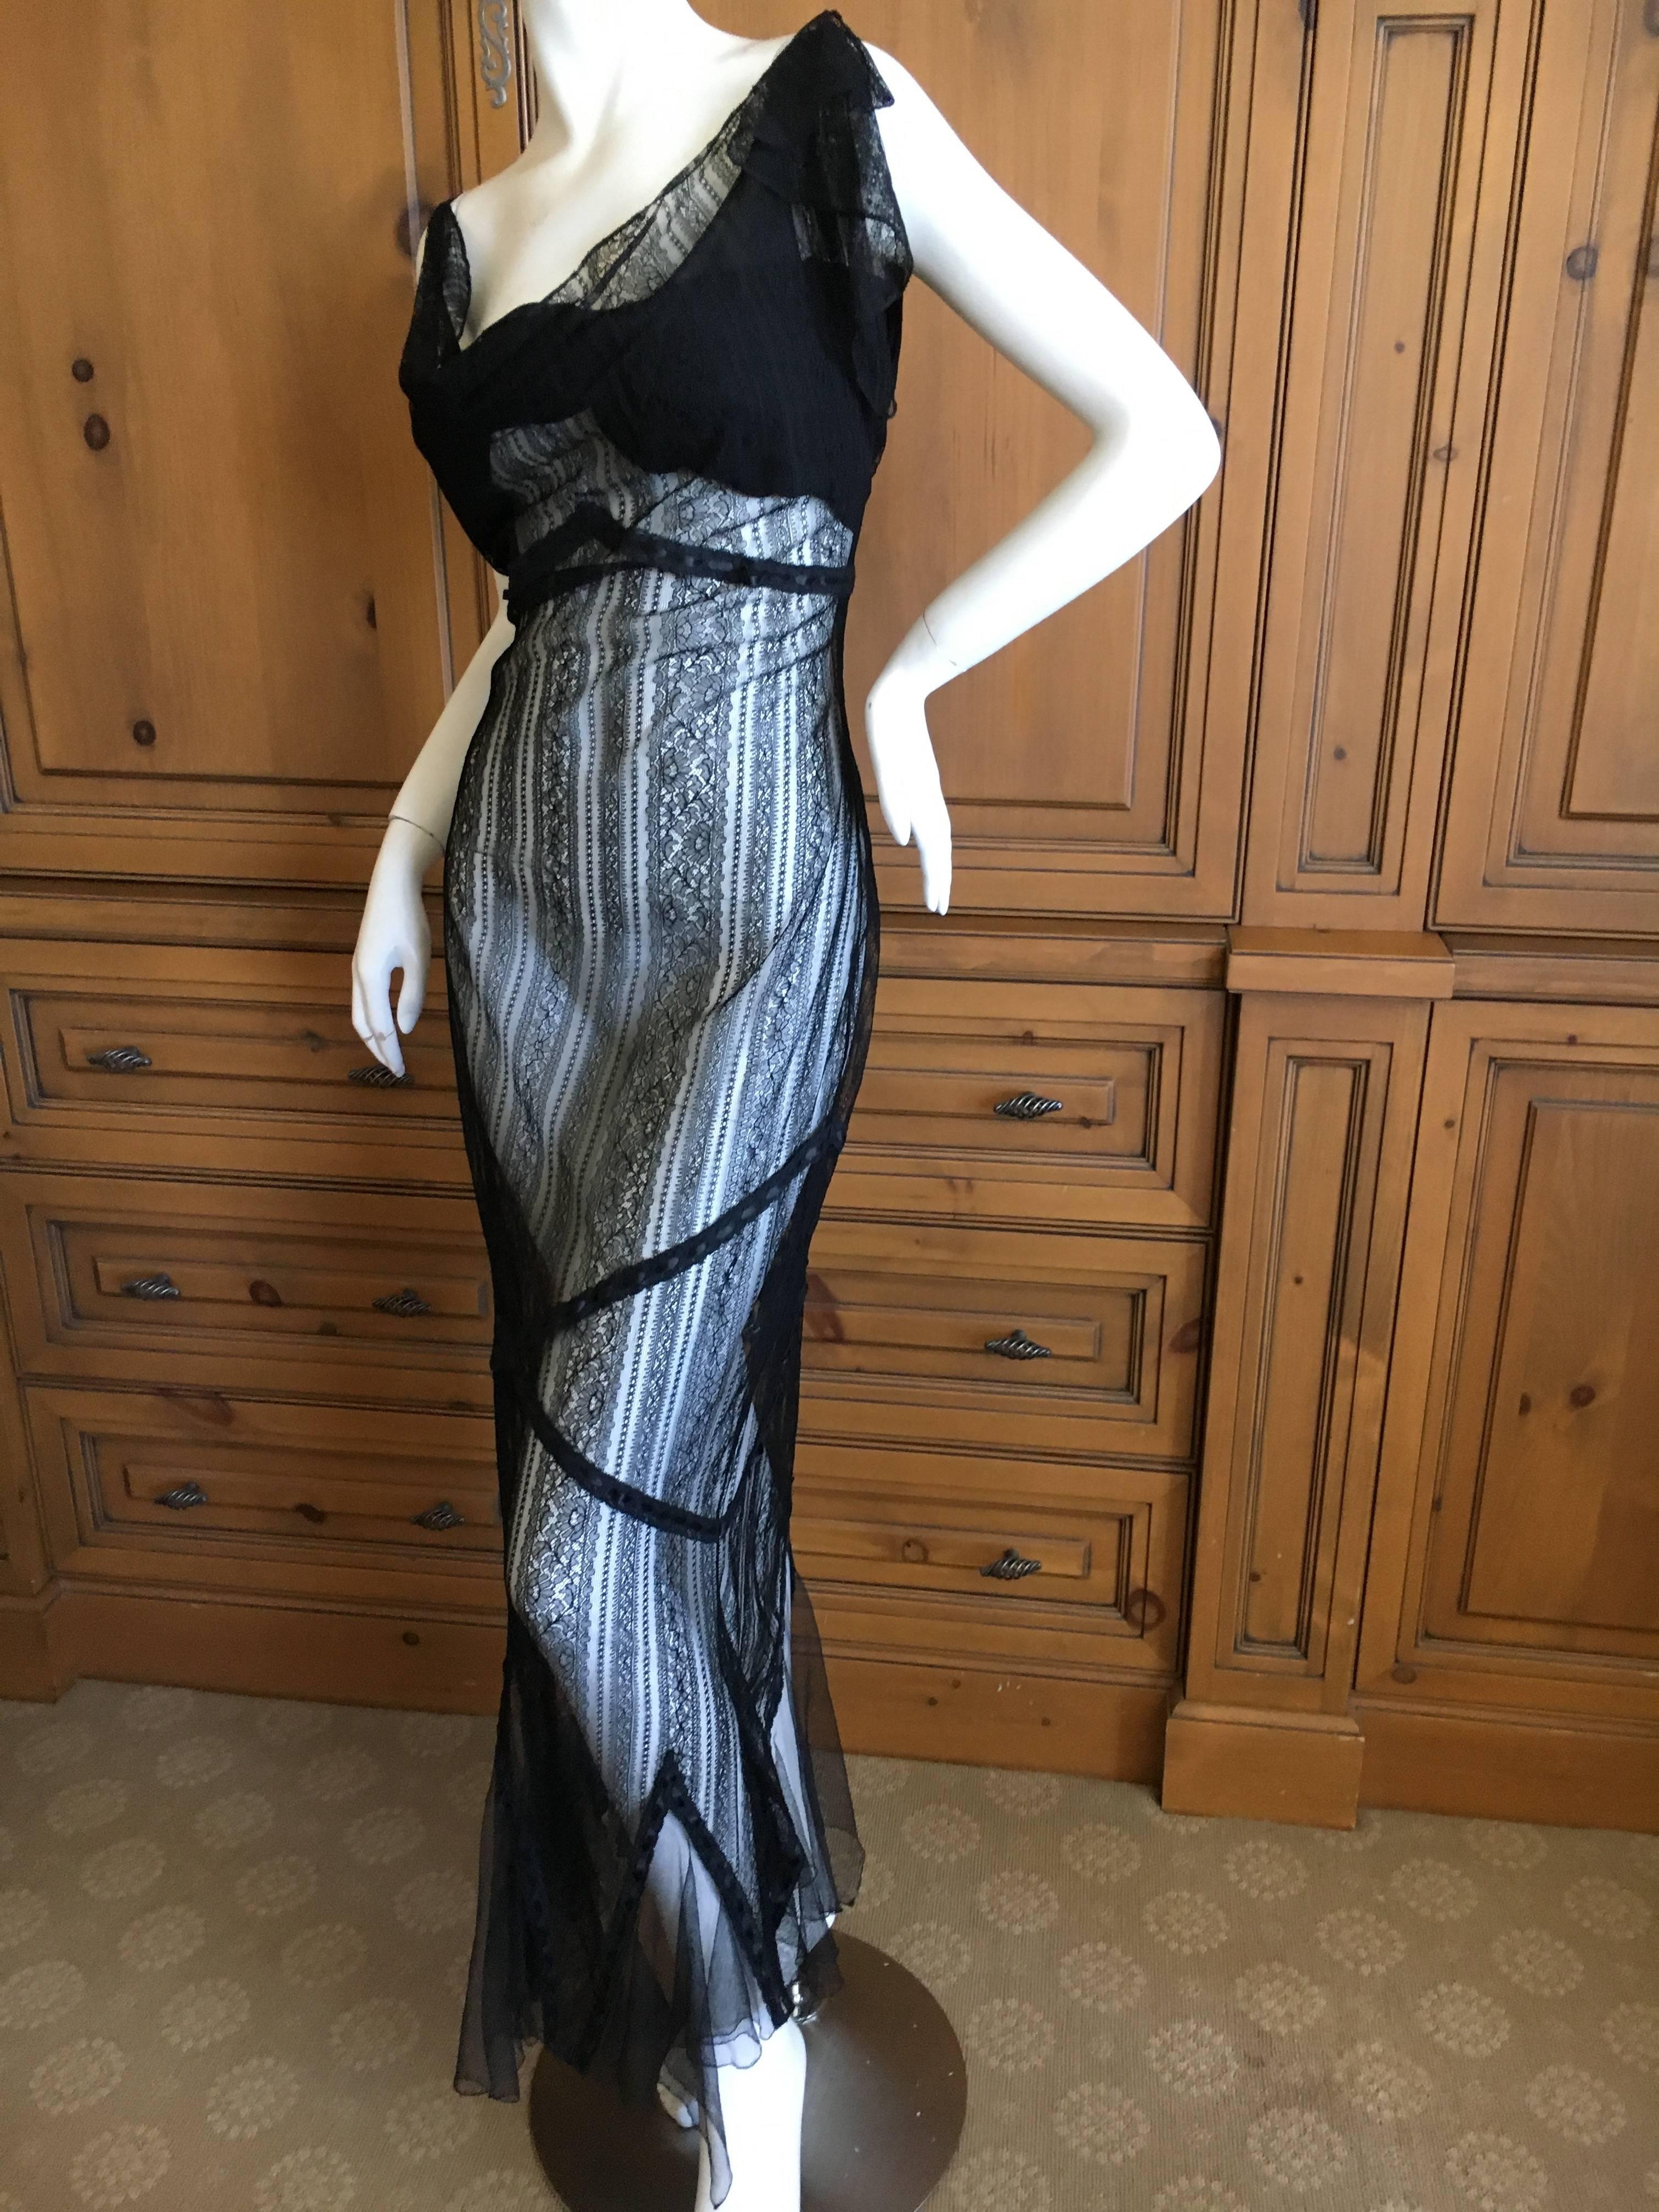 John Galliano Elegant Vintage Black Lace Evening Dress.
There is an underslip and the hemline matches the lace.
I also show the dress with the slip hiked up, as I have a client who always removes the slip from these great Galliano's and wears them